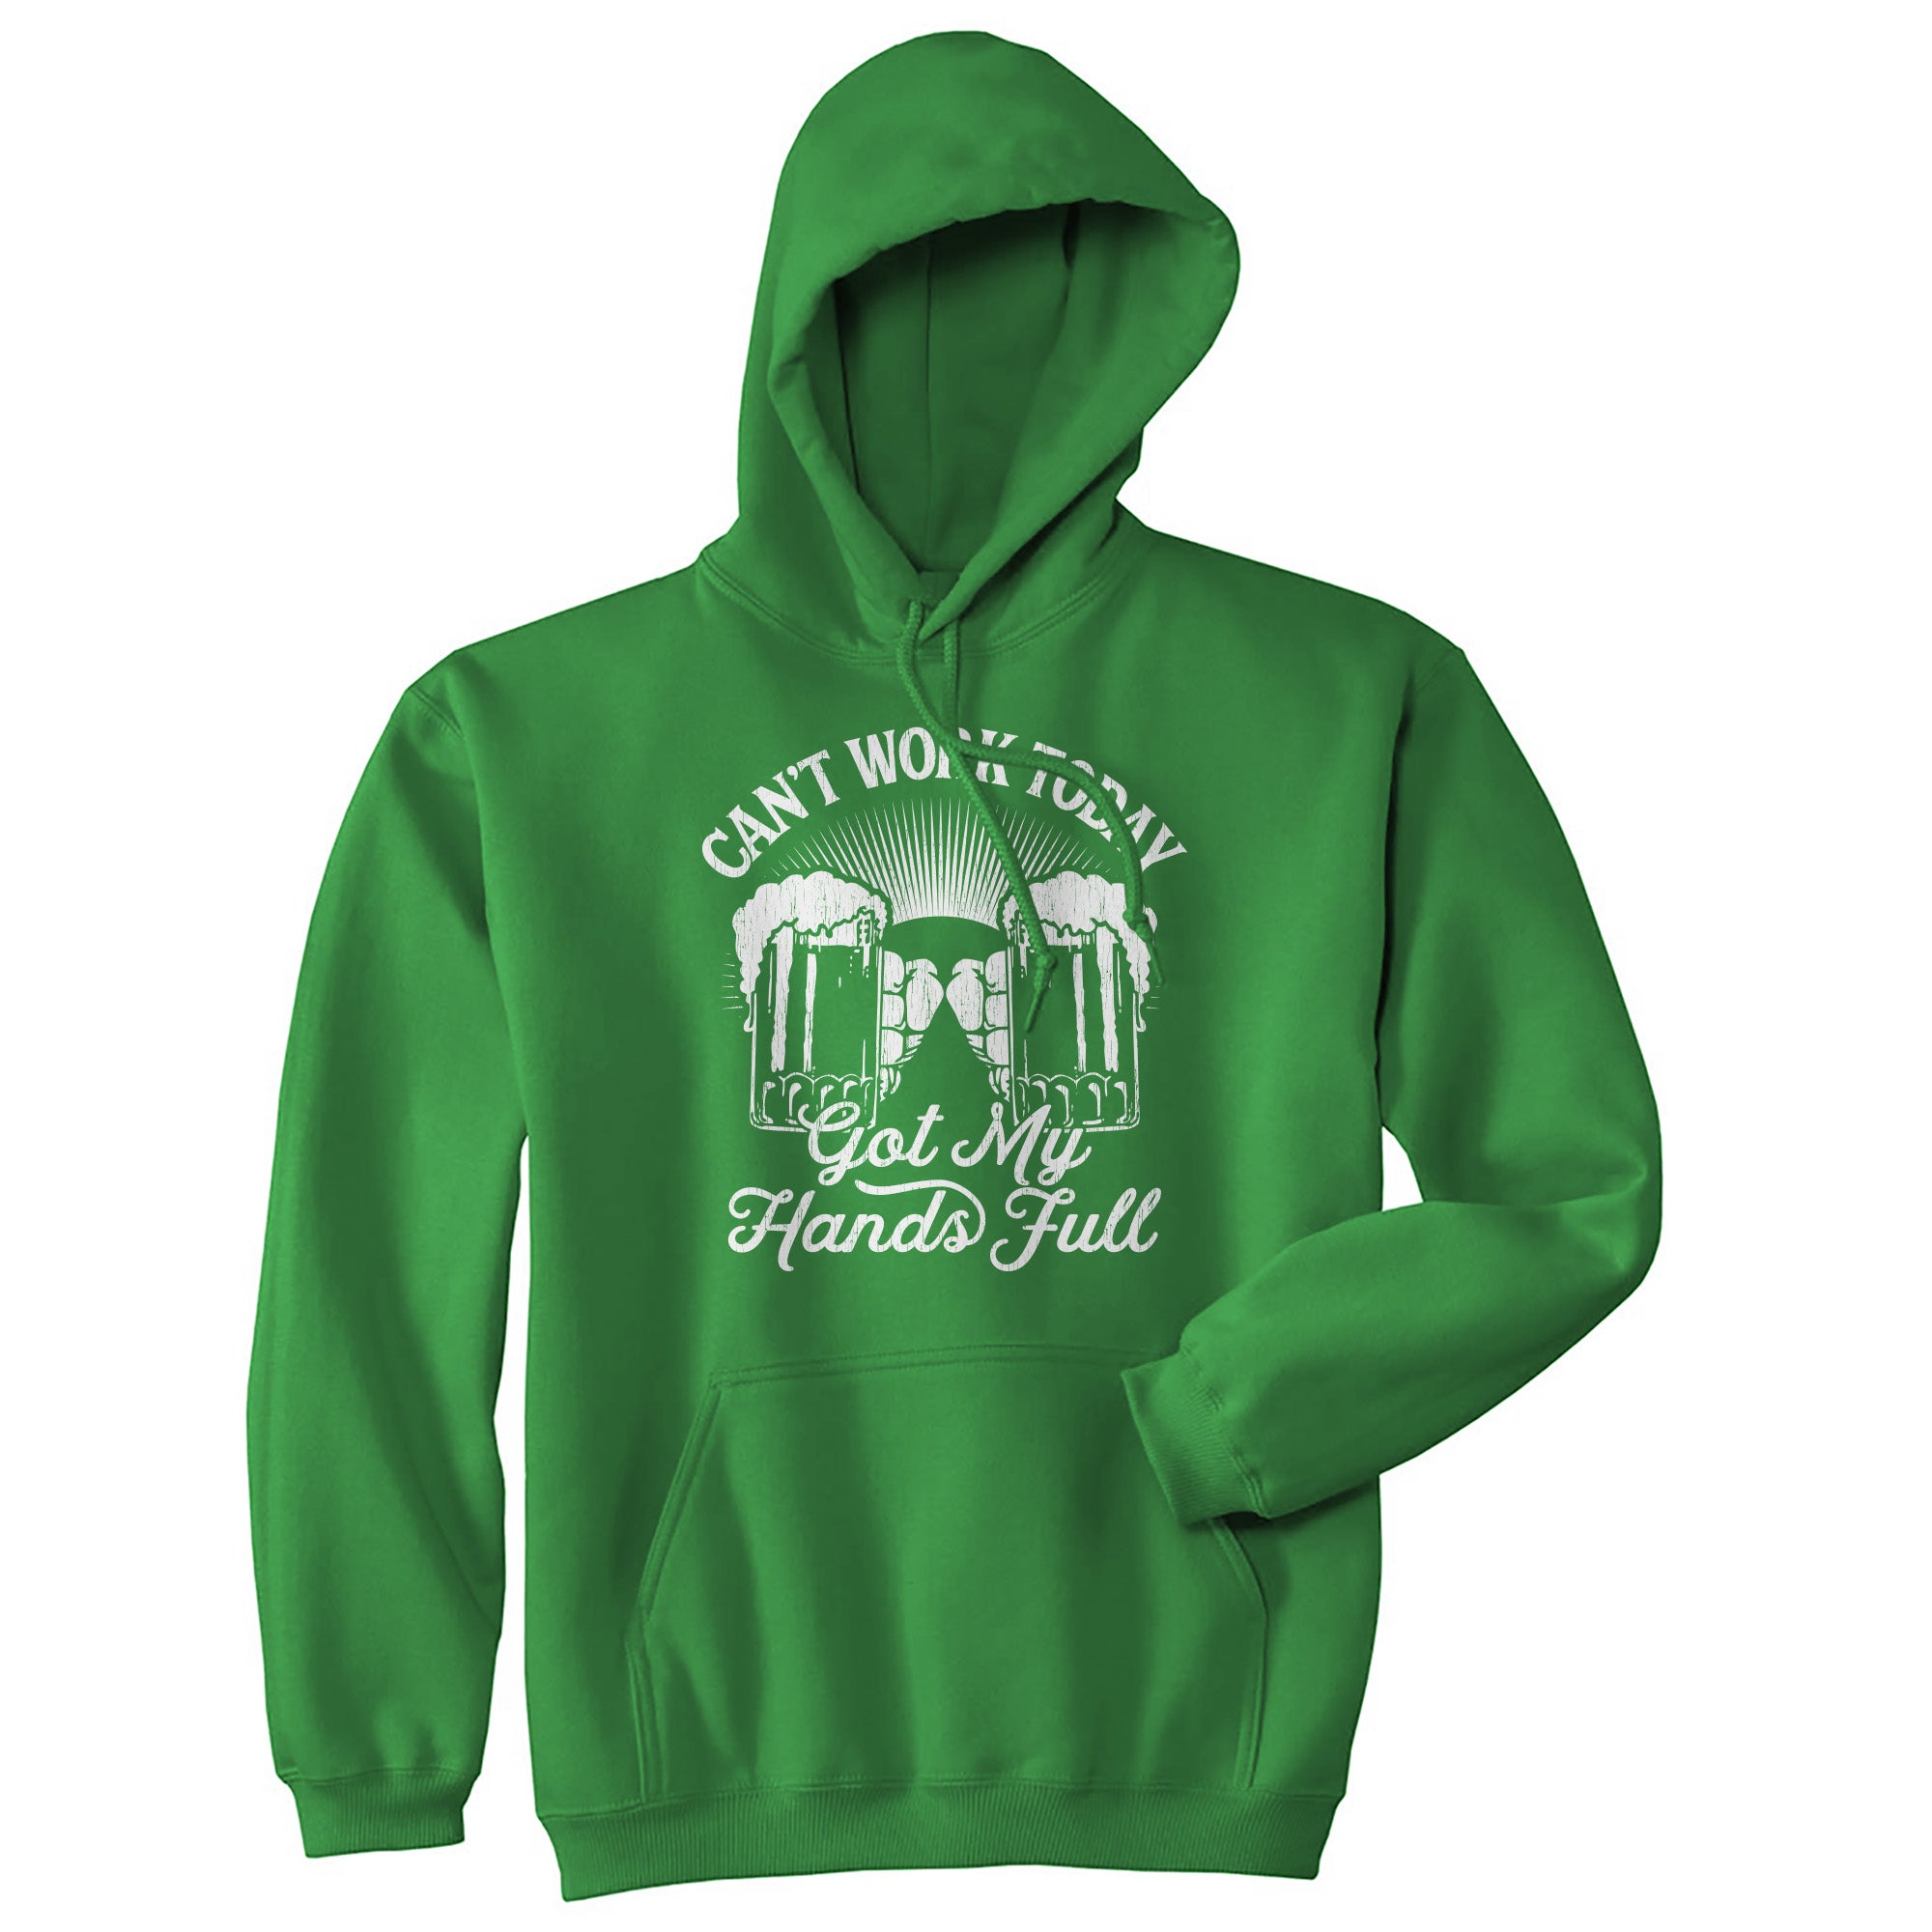 Funny Green Cant Work Today Got My Hands Full Hoodie Nerdy Saint Patrick's Day Drinking Tee